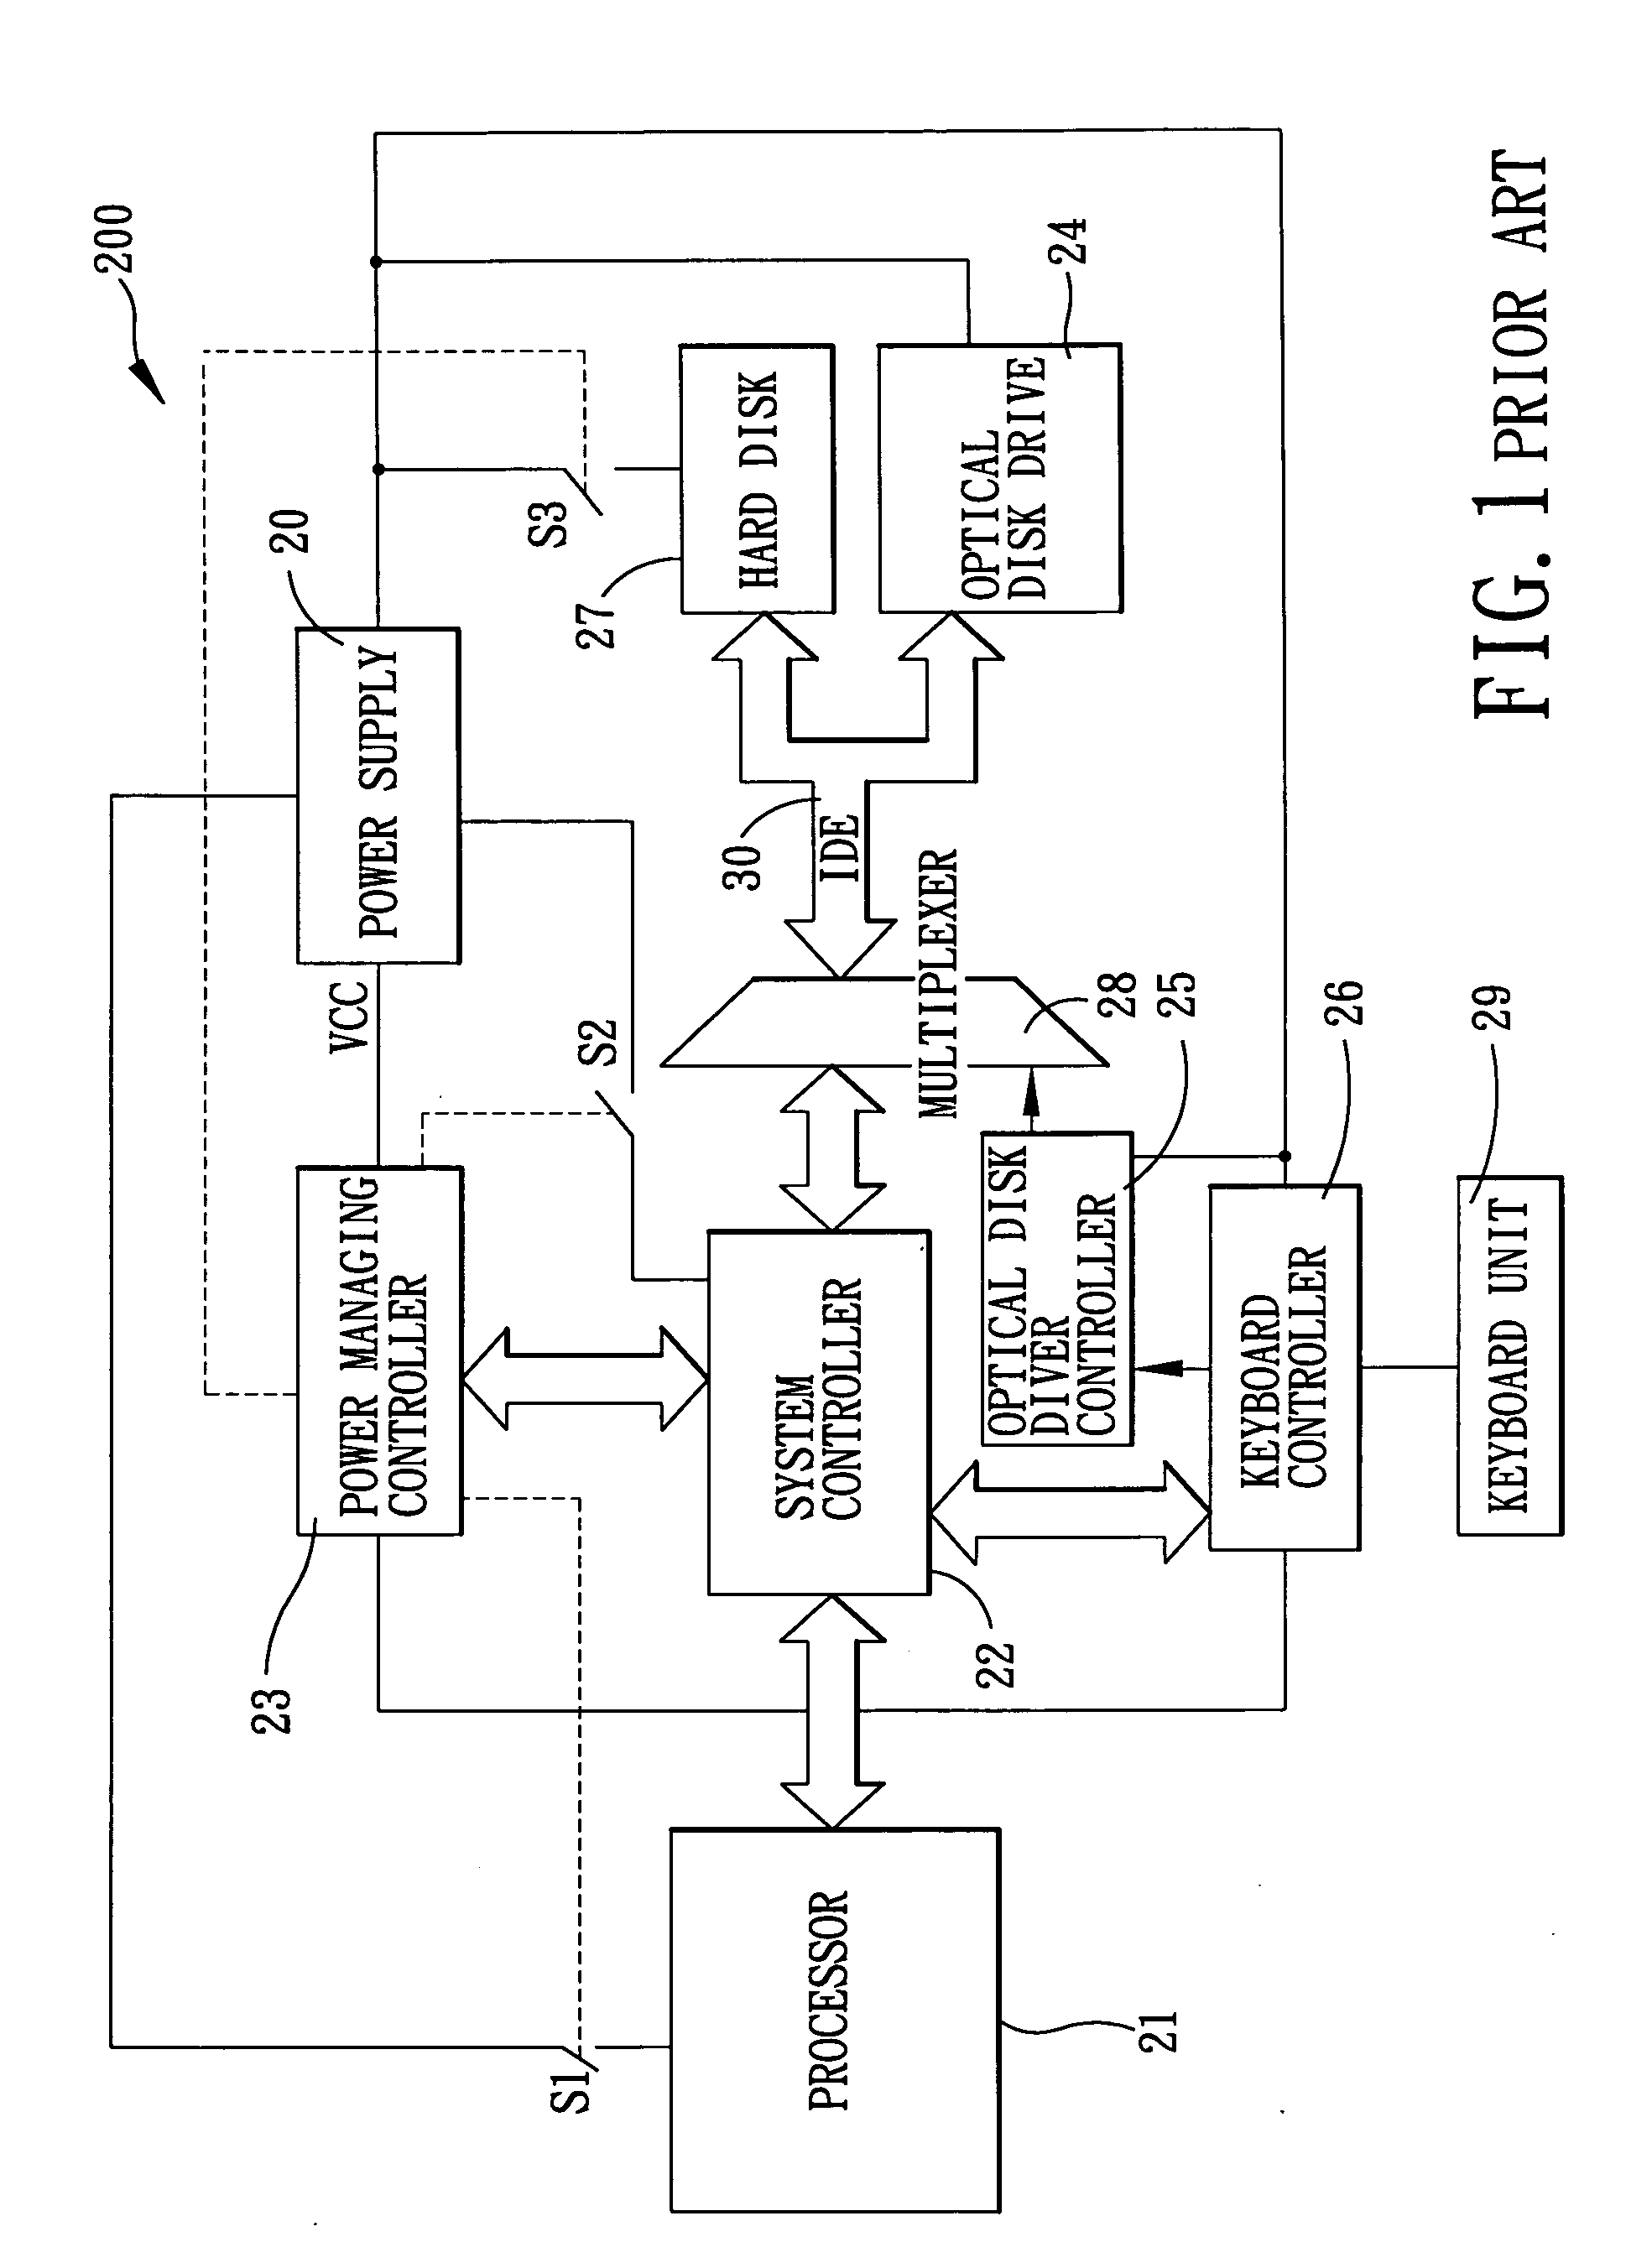 Computer device and method of controlling an optical disk drive thereof